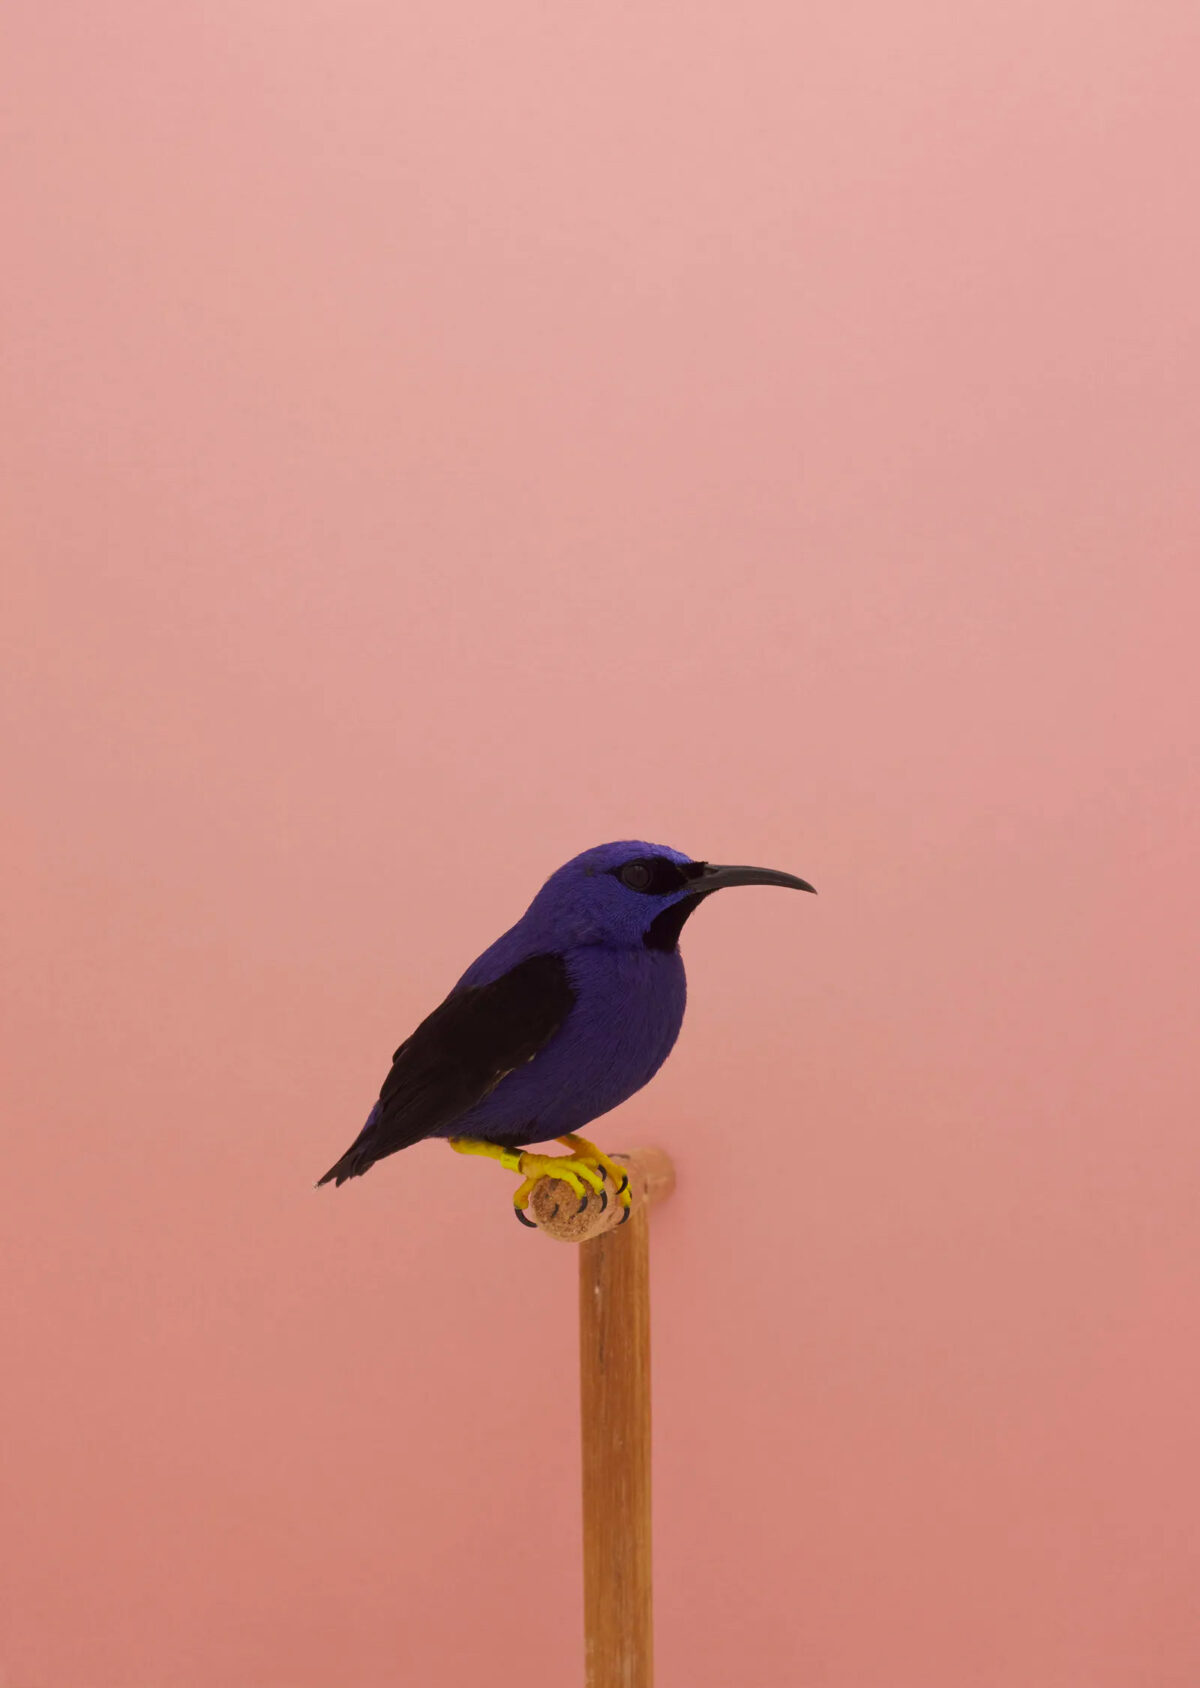 An Incomplete Dictionary Of Show Birds A Minimalist Bird Photography Series By Luke Stephenson (10)